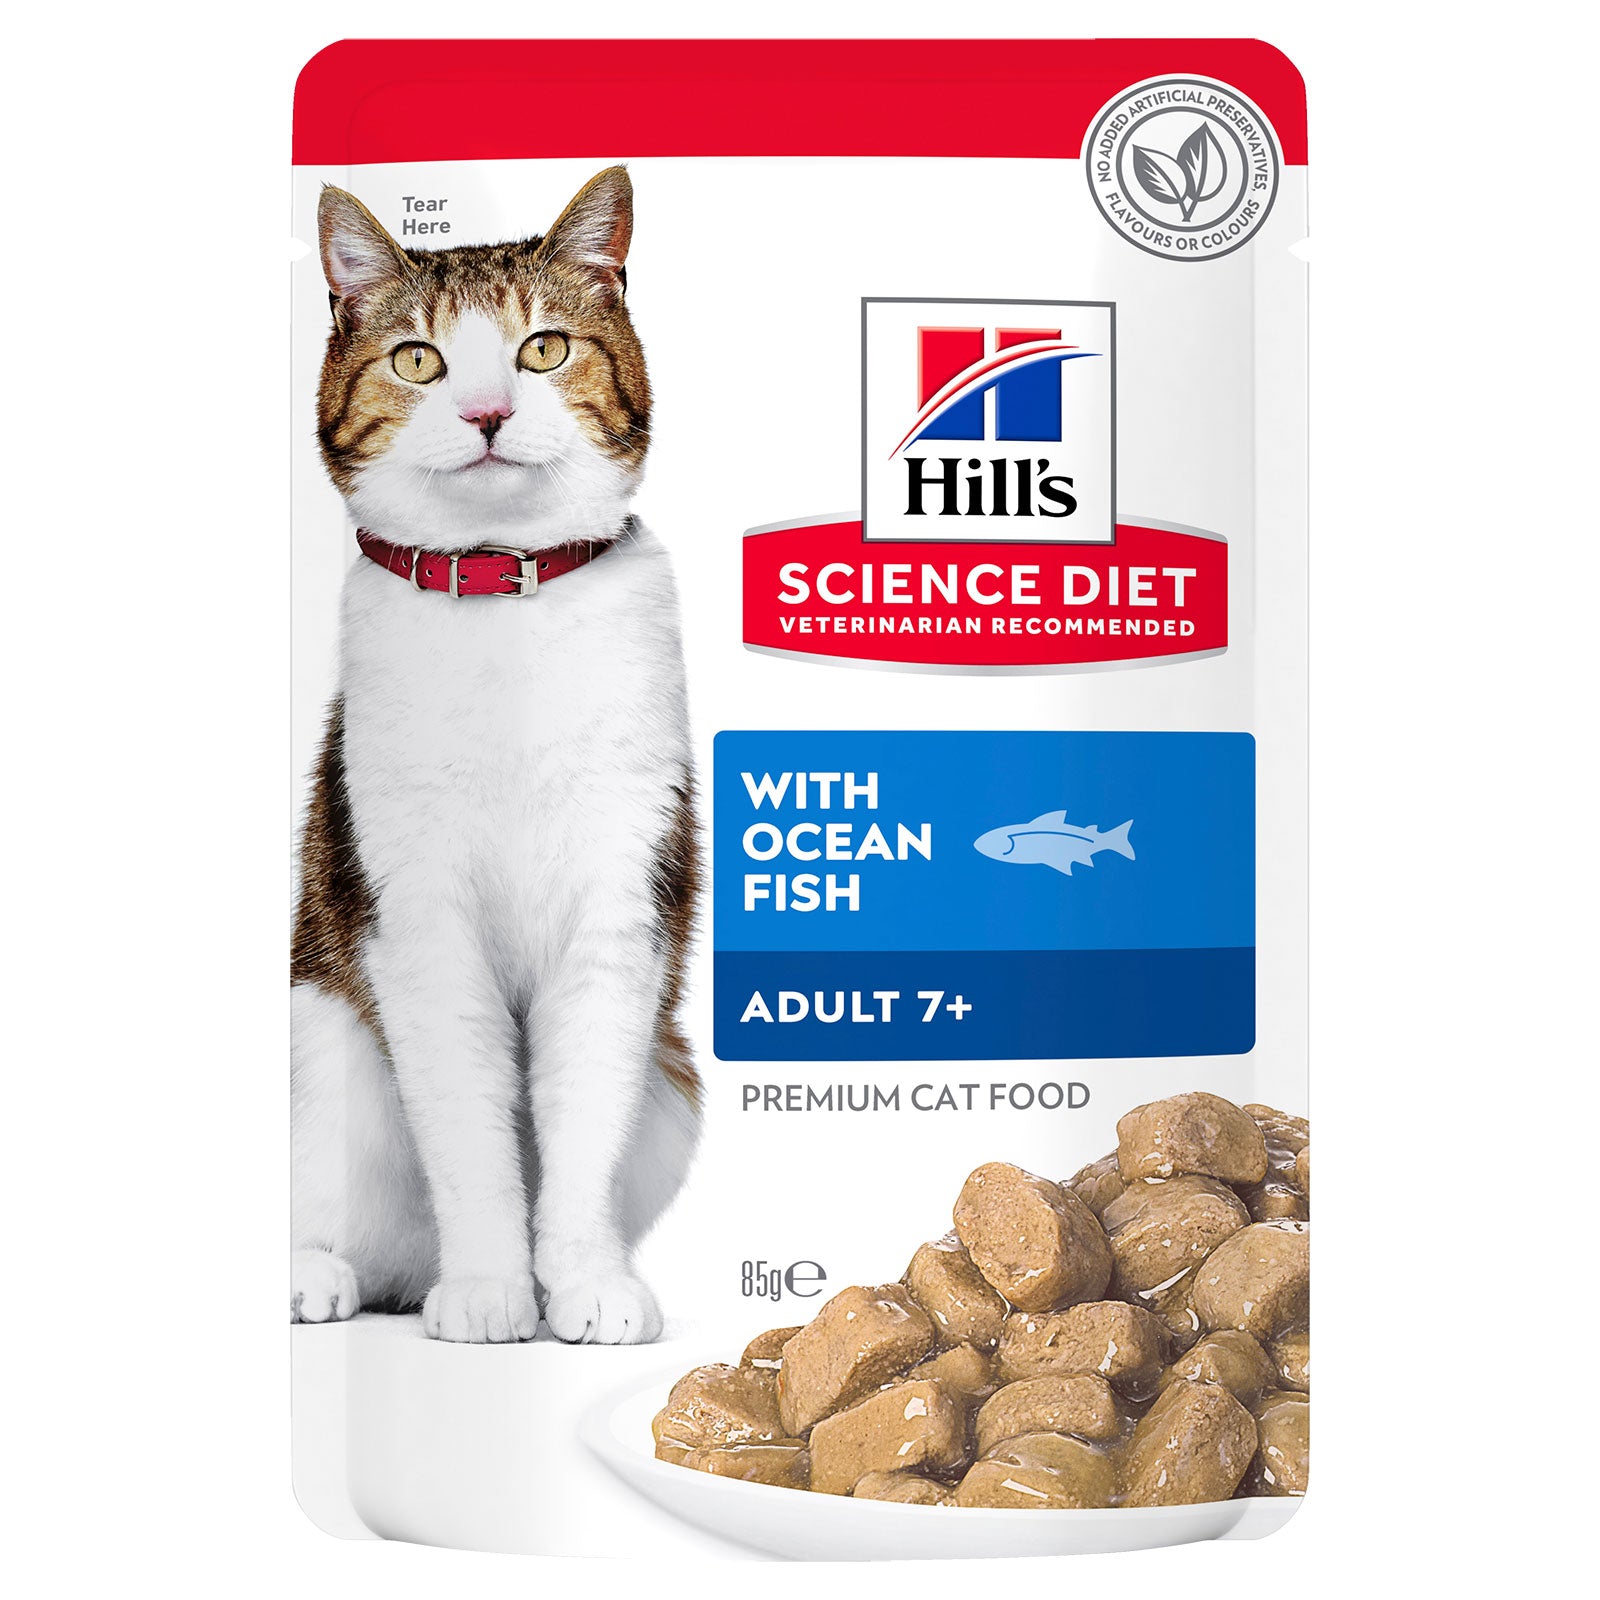 Hill's Science Diet Cat Food Pouch Adult 7+ Ocean Fish